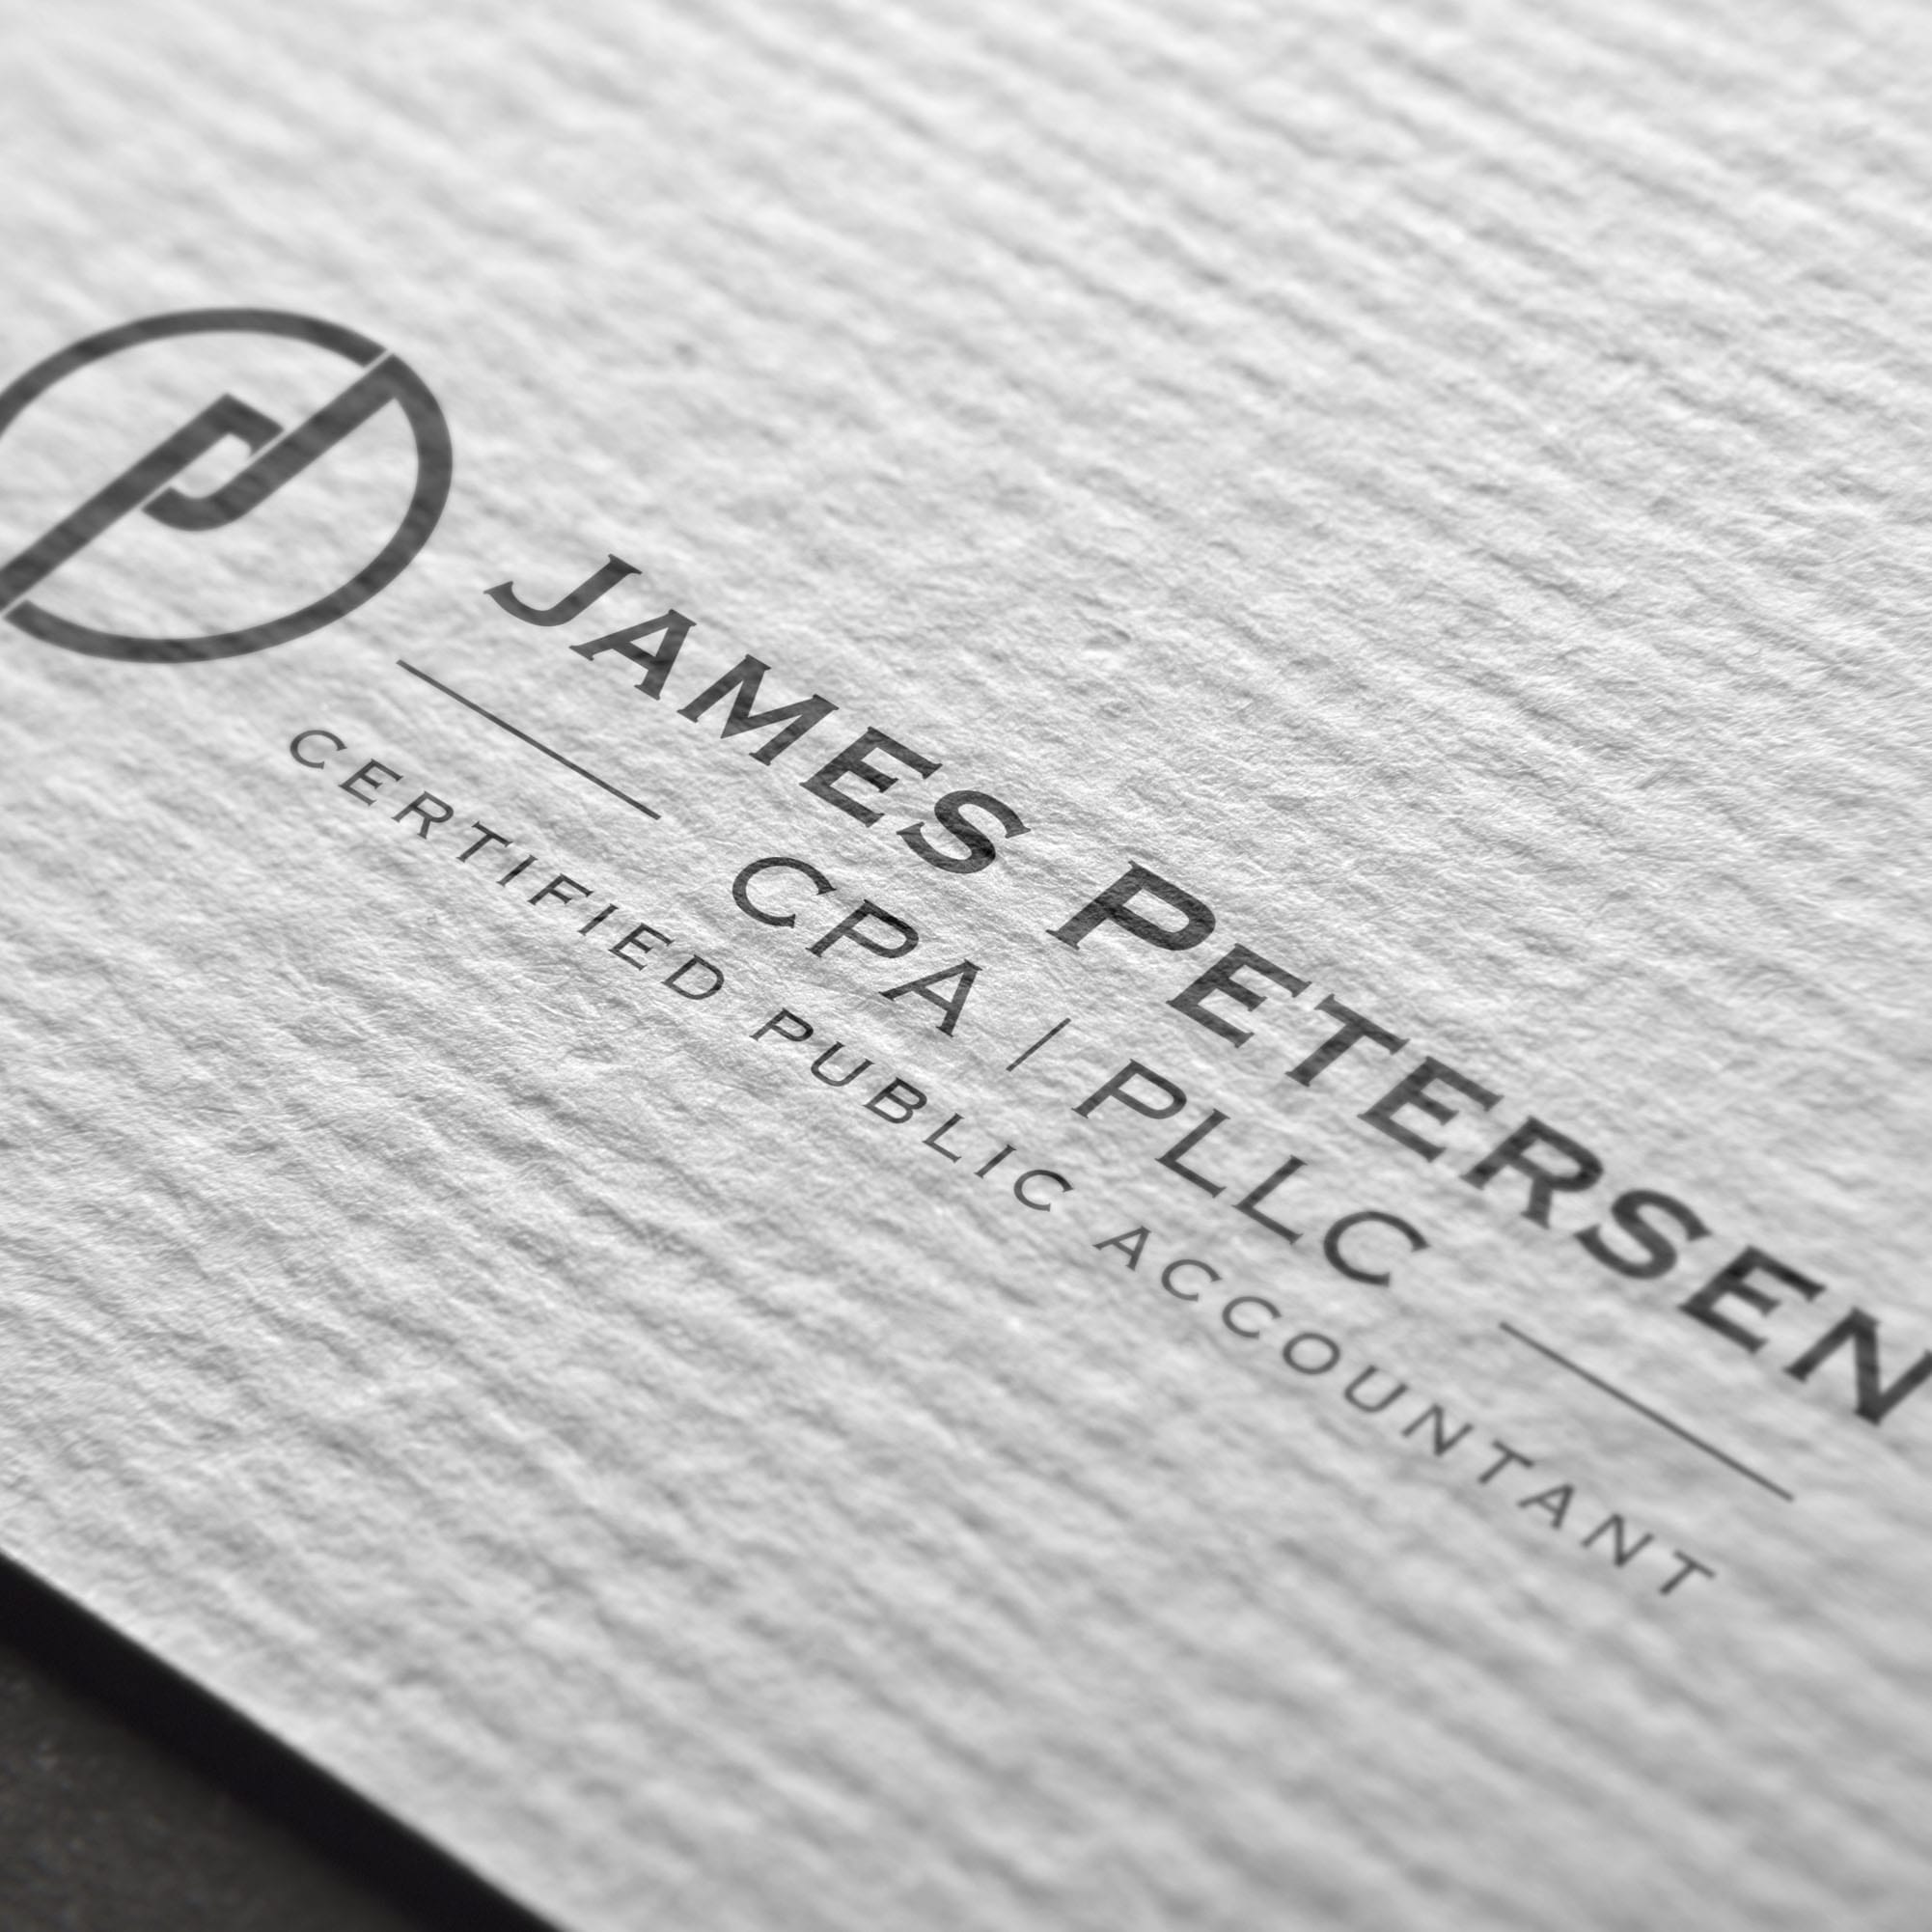 James Petersen CPA mocked up business card.